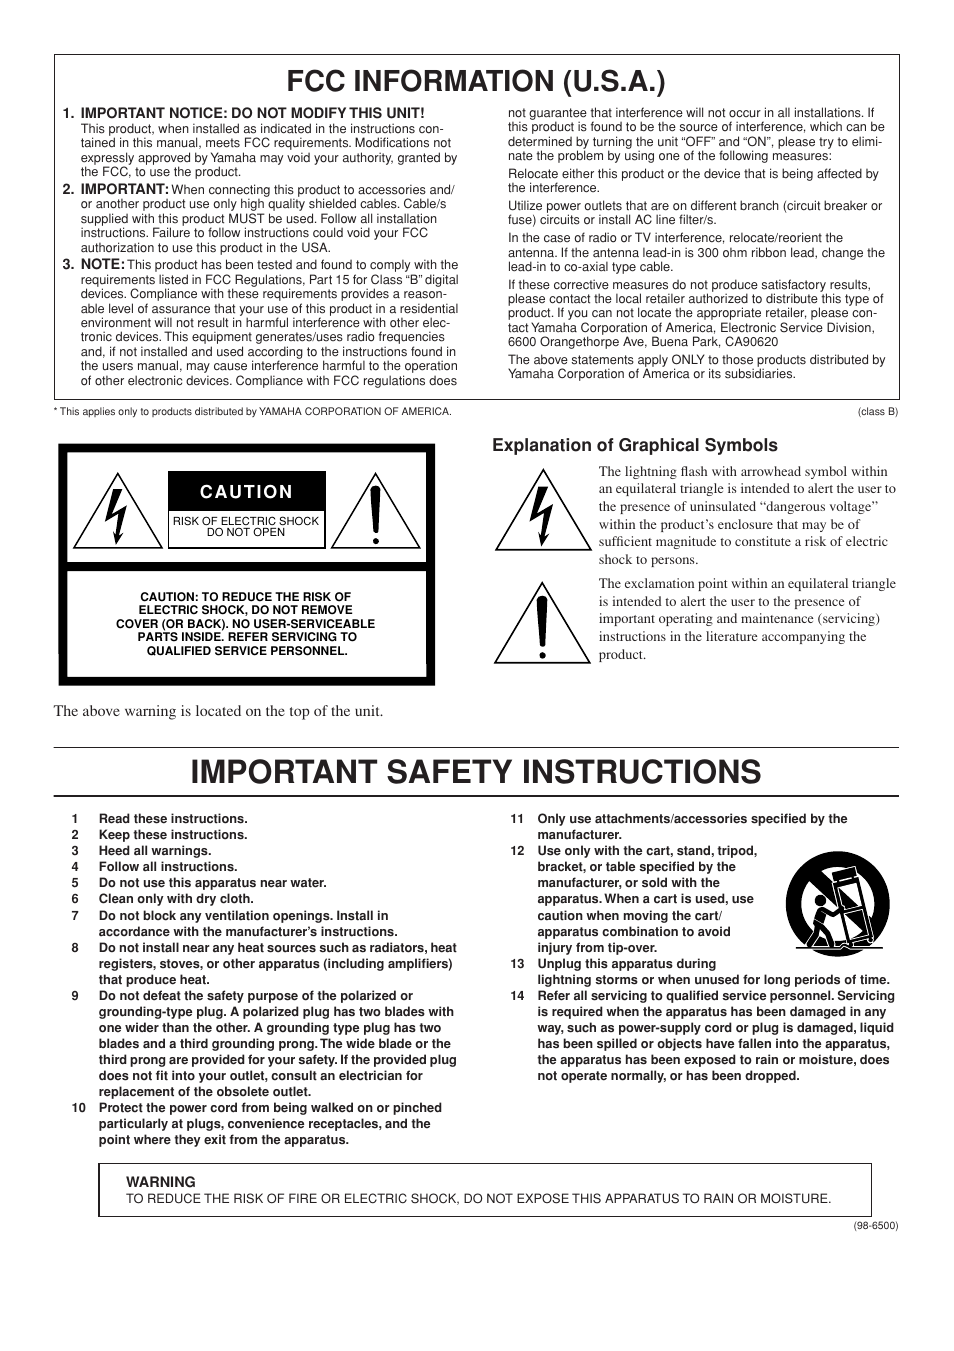 Important safety instructions, Fcc information (u.s.a.), Explanation of graphical symbols | Yamaha PC4801N Benutzerhandbuch | Seite 2 / 16